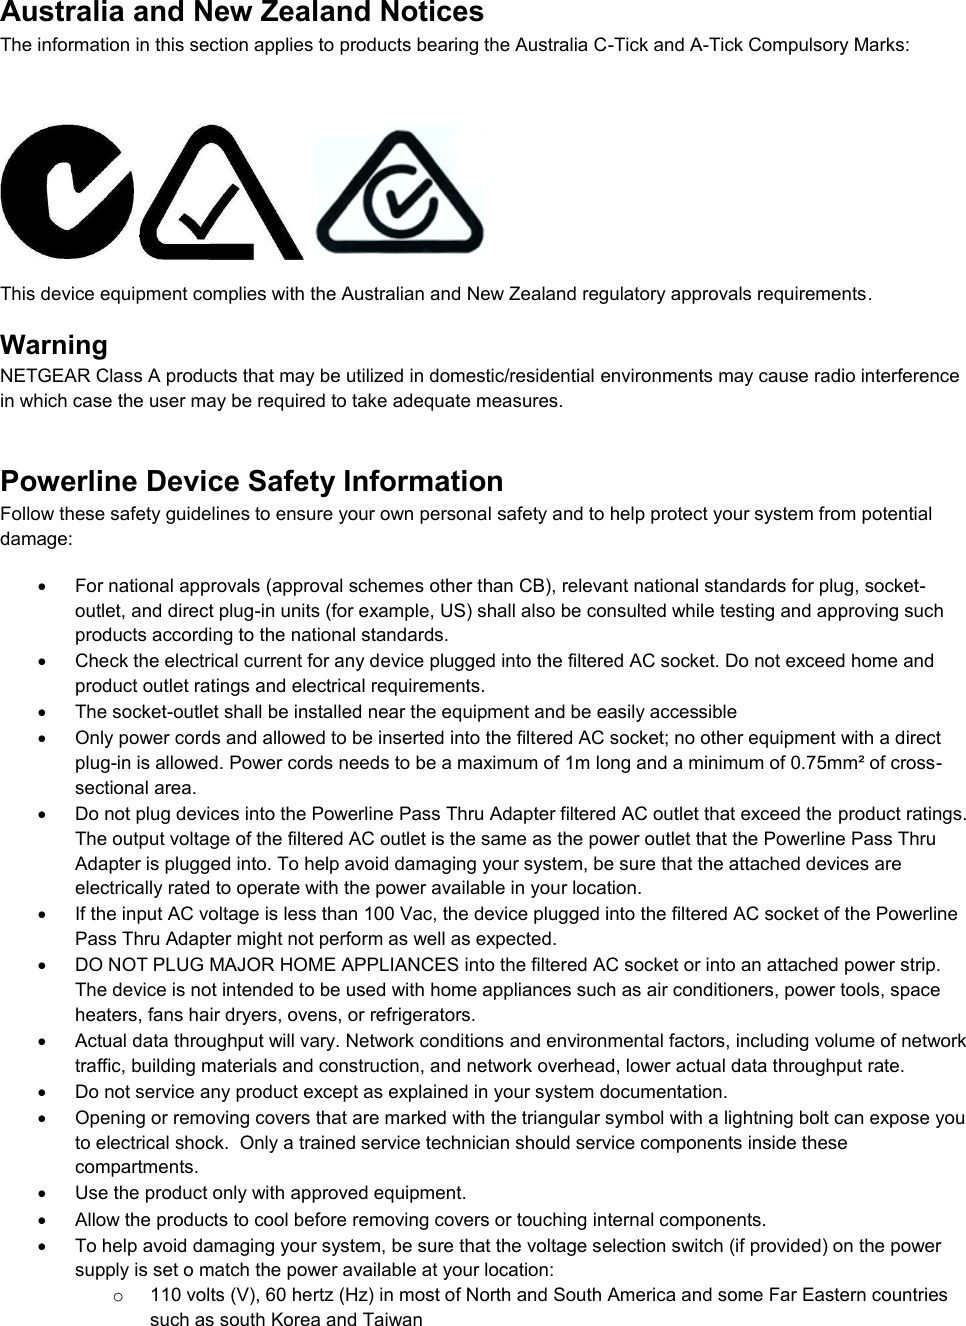  Australia and New Zealand Notices The information in this section applies to products bearing the Australia C-Tick and A-Tick Compulsory Marks:       This device equipment complies with the Australian and New Zealand regulatory approvals requirements. Warning NETGEAR Class A products that may be utilized in domestic/residential environments may cause radio interference in which case the user may be required to take adequate measures.  Powerline Device Safety Information Follow these safety guidelines to ensure your own personal safety and to help protect your system from potential damage:   For national approvals (approval schemes other than CB), relevant national standards for plug, socket-outlet, and direct plug-in units (for example, US) shall also be consulted while testing and approving such products according to the national standards.    Check the electrical current for any device plugged into the filtered AC socket. Do not exceed home and product outlet ratings and electrical requirements.   The socket-outlet shall be installed near the equipment and be easily accessible   Only power cords and allowed to be inserted into the filtered AC socket; no other equipment with a direct plug-in is allowed. Power cords needs to be a maximum of 1m long and a minimum of 0.75mm² of cross-sectional area.   Do not plug devices into the Powerline Pass Thru Adapter filtered AC outlet that exceed the product ratings.  The output voltage of the filtered AC outlet is the same as the power outlet that the Powerline Pass Thru Adapter is plugged into. To help avoid damaging your system, be sure that the attached devices are electrically rated to operate with the power available in your location.   If the input AC voltage is less than 100 Vac, the device plugged into the filtered AC socket of the Powerline Pass Thru Adapter might not perform as well as expected.   DO NOT PLUG MAJOR HOME APPLIANCES into the filtered AC socket or into an attached power strip.  The device is not intended to be used with home appliances such as air conditioners, power tools, space heaters, fans hair dryers, ovens, or refrigerators.    Actual data throughput will vary. Network conditions and environmental factors, including volume of network traffic, building materials and construction, and network overhead, lower actual data throughput rate.    Do not service any product except as explained in your system documentation.    Opening or removing covers that are marked with the triangular symbol with a lightning bolt can expose you to electrical shock.  Only a trained service technician should service components inside these compartments.   Use the product only with approved equipment.   Allow the products to cool before removing covers or touching internal components.   To help avoid damaging your system, be sure that the voltage selection switch (if provided) on the power supply is set o match the power available at your location: o  110 volts (V), 60 hertz (Hz) in most of North and South America and some Far Eastern countries such as south Korea and Taiwan 